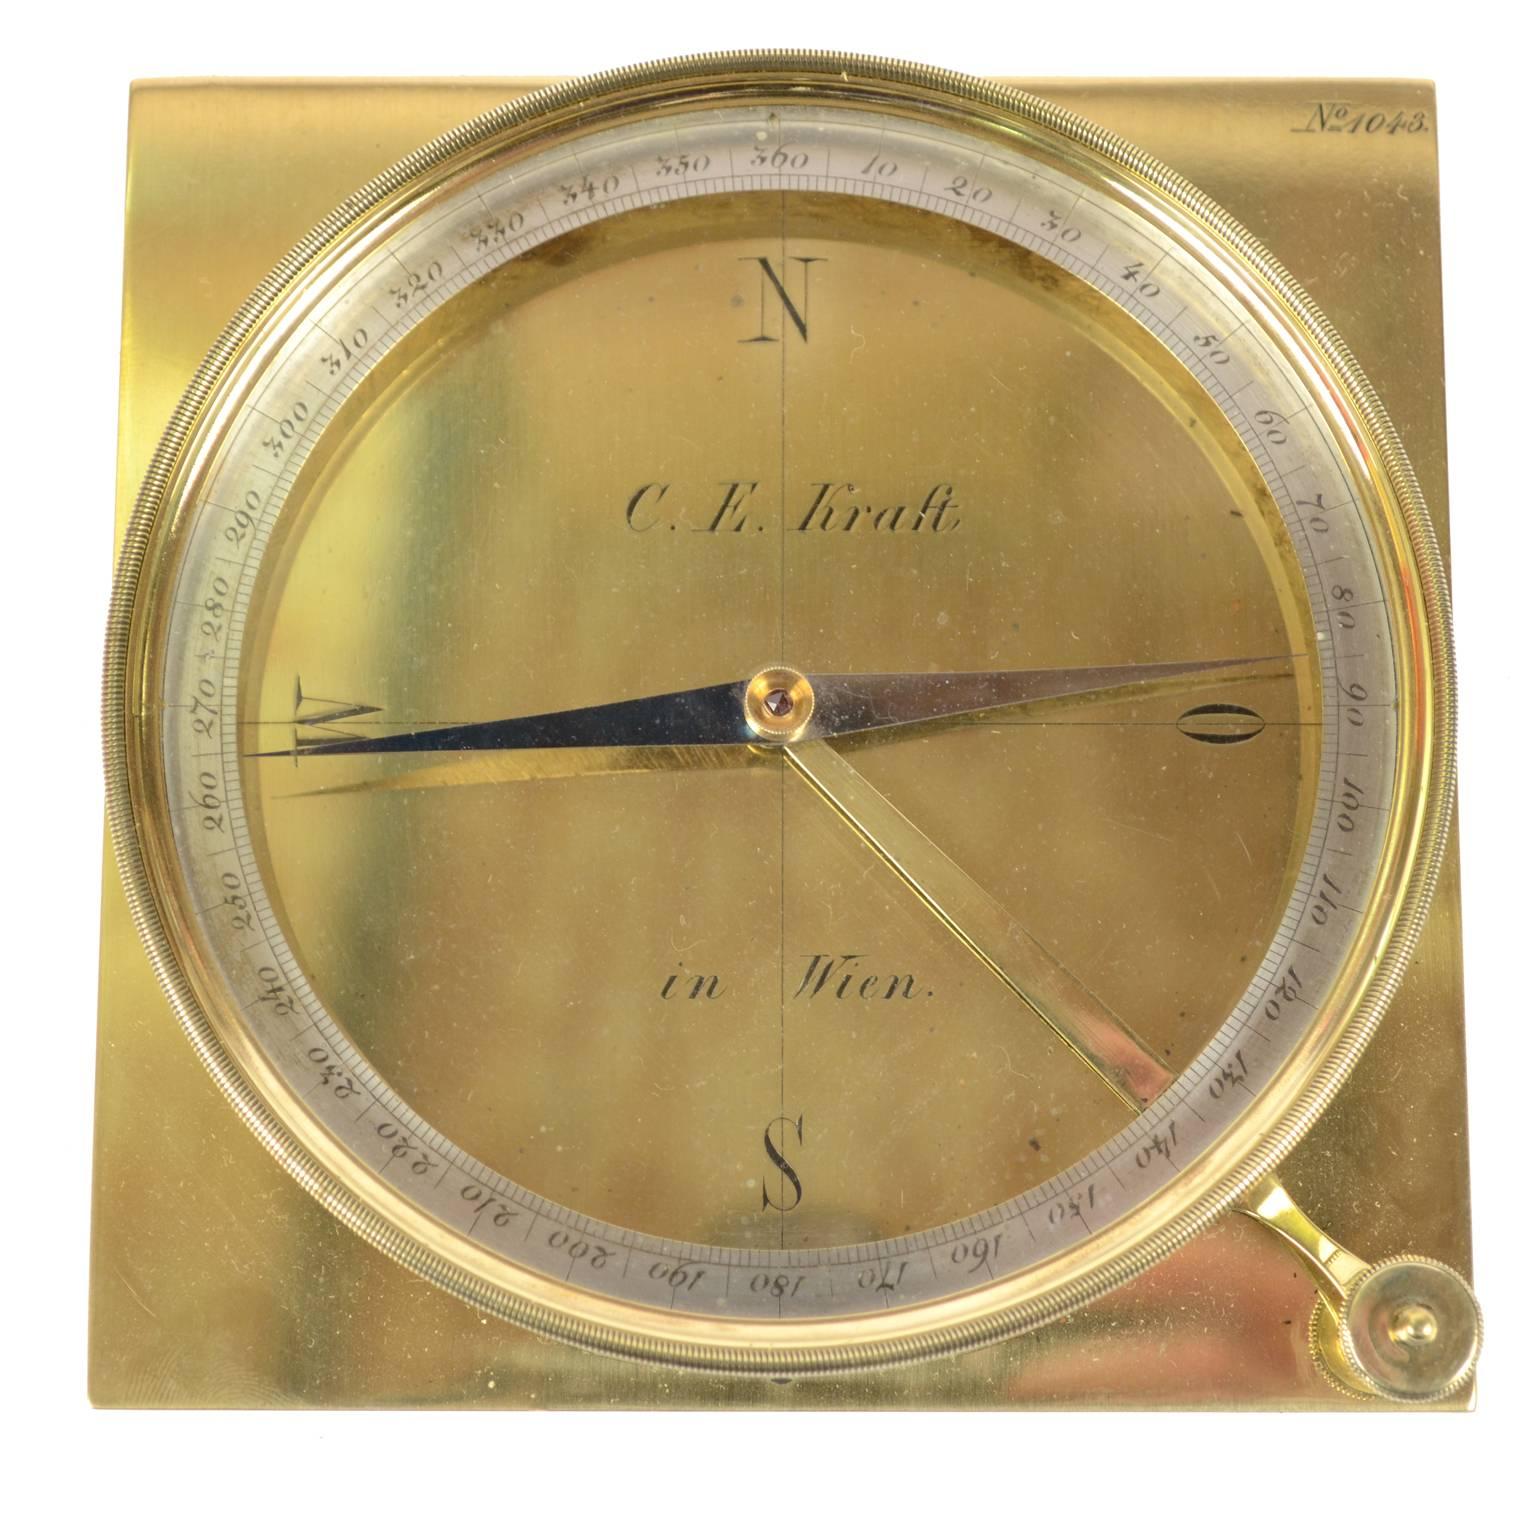 Brass topographic compass signed C.E Kraft in Wien placed in its original wooden box, second half of the 19th century. The compass is complete with a goniometric circle engraved from 10° to 360° and equipped with needle lock for the calculation of